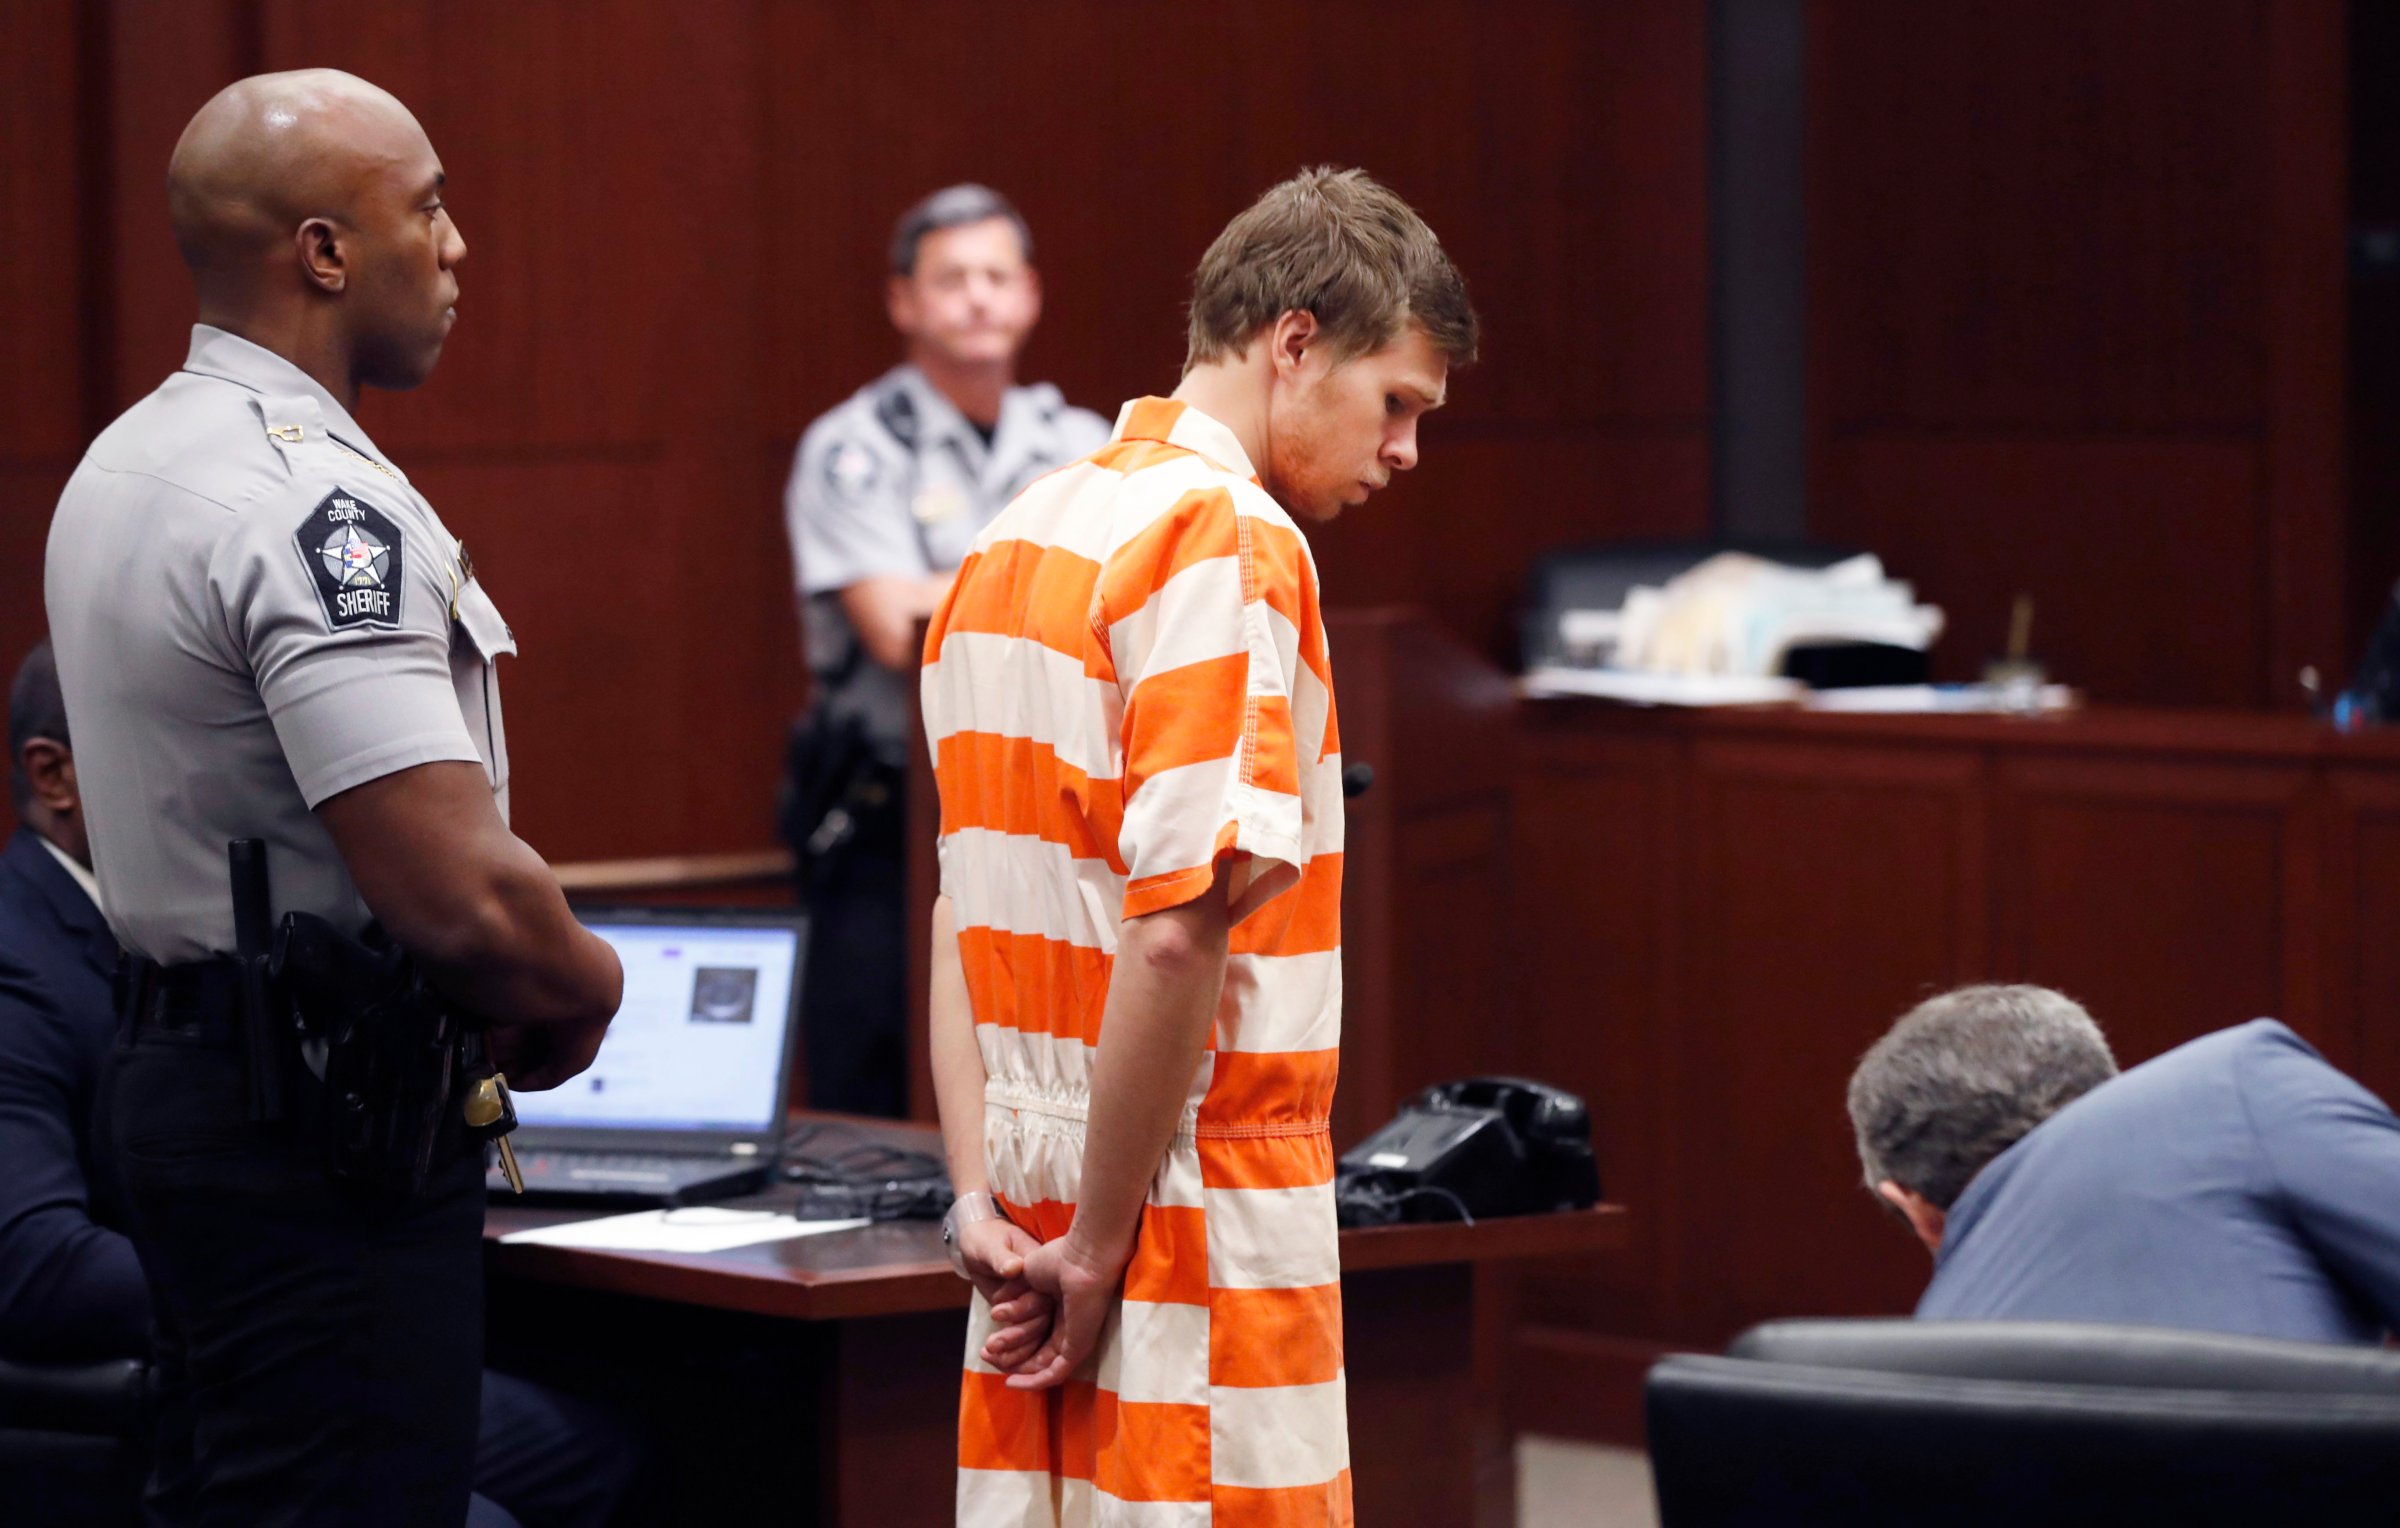 Matthew Phelps stands in the courtroom during his first appearance Tuesday, Sept. 5, 2017, in Raleigh, N.C. Phelps is charged in the death of his wife, Lauren Ashley-Nicole Phelps.